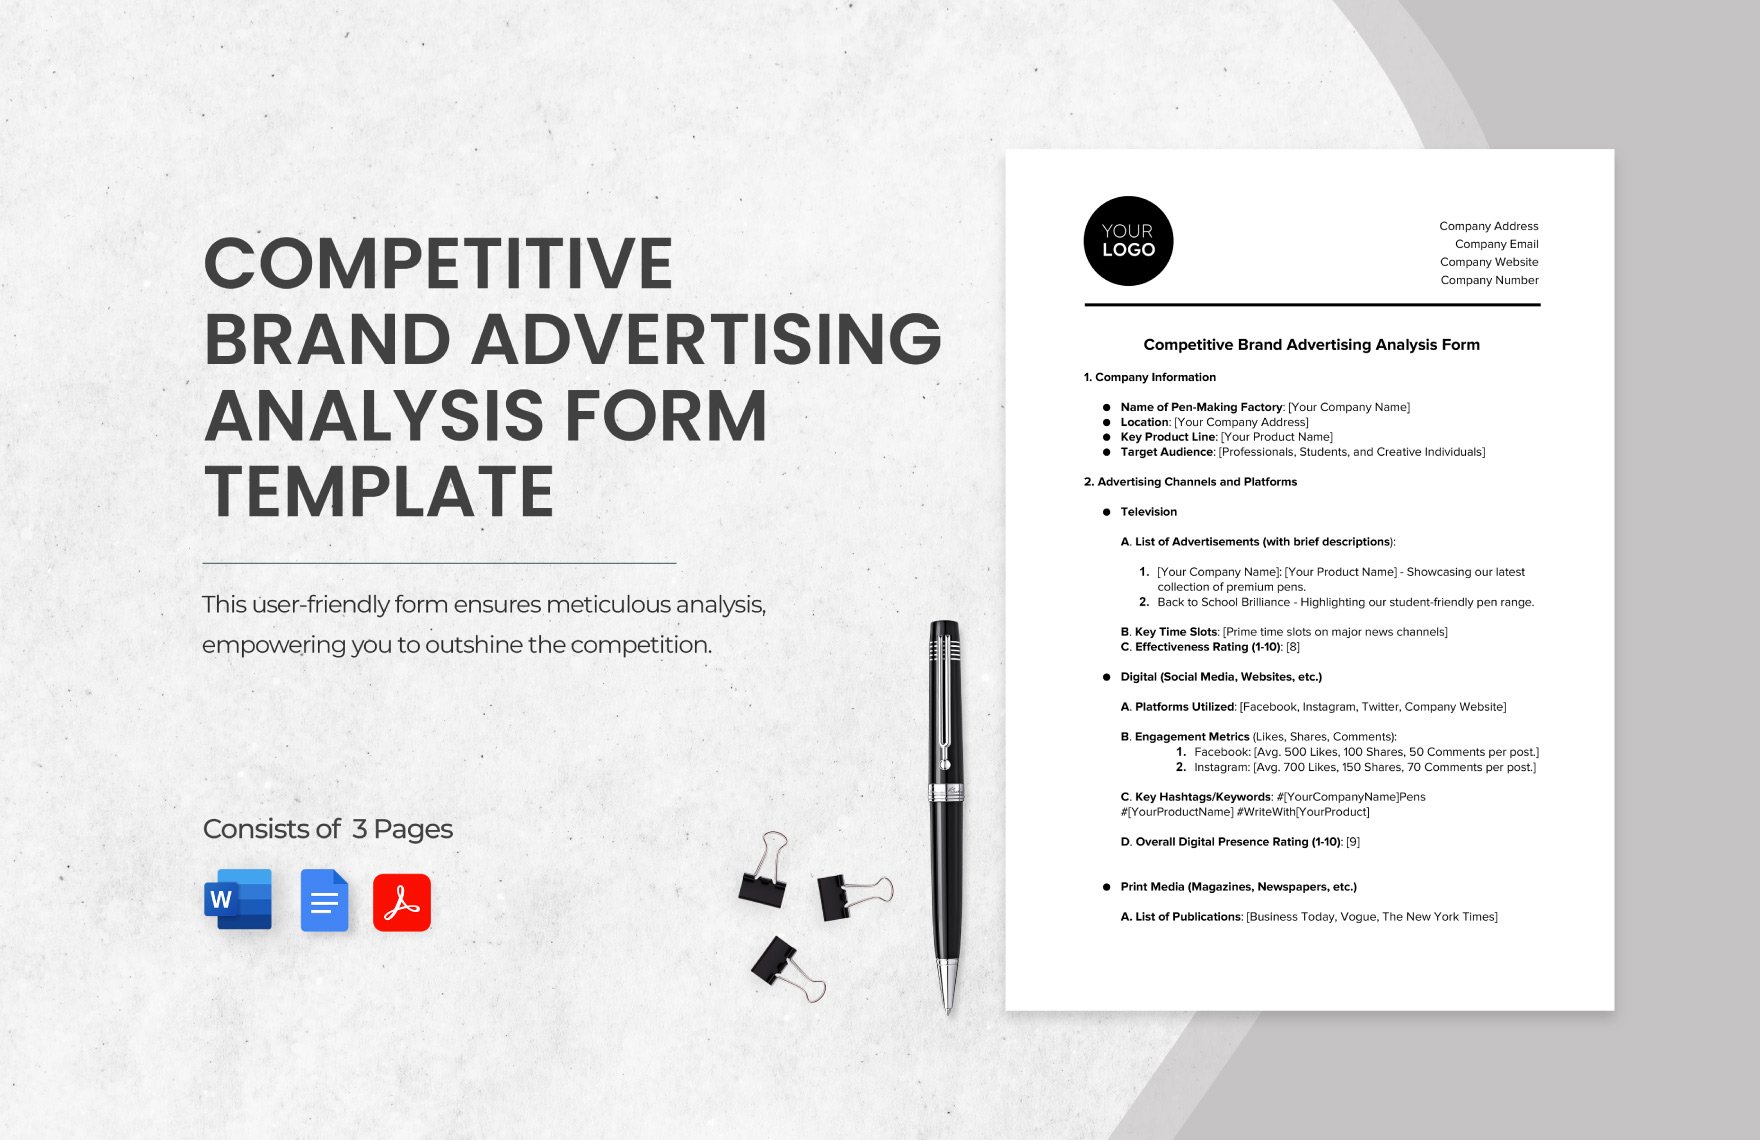 Competitive Brand Advertising Analysis Form Template in Word, Google Docs, PDF